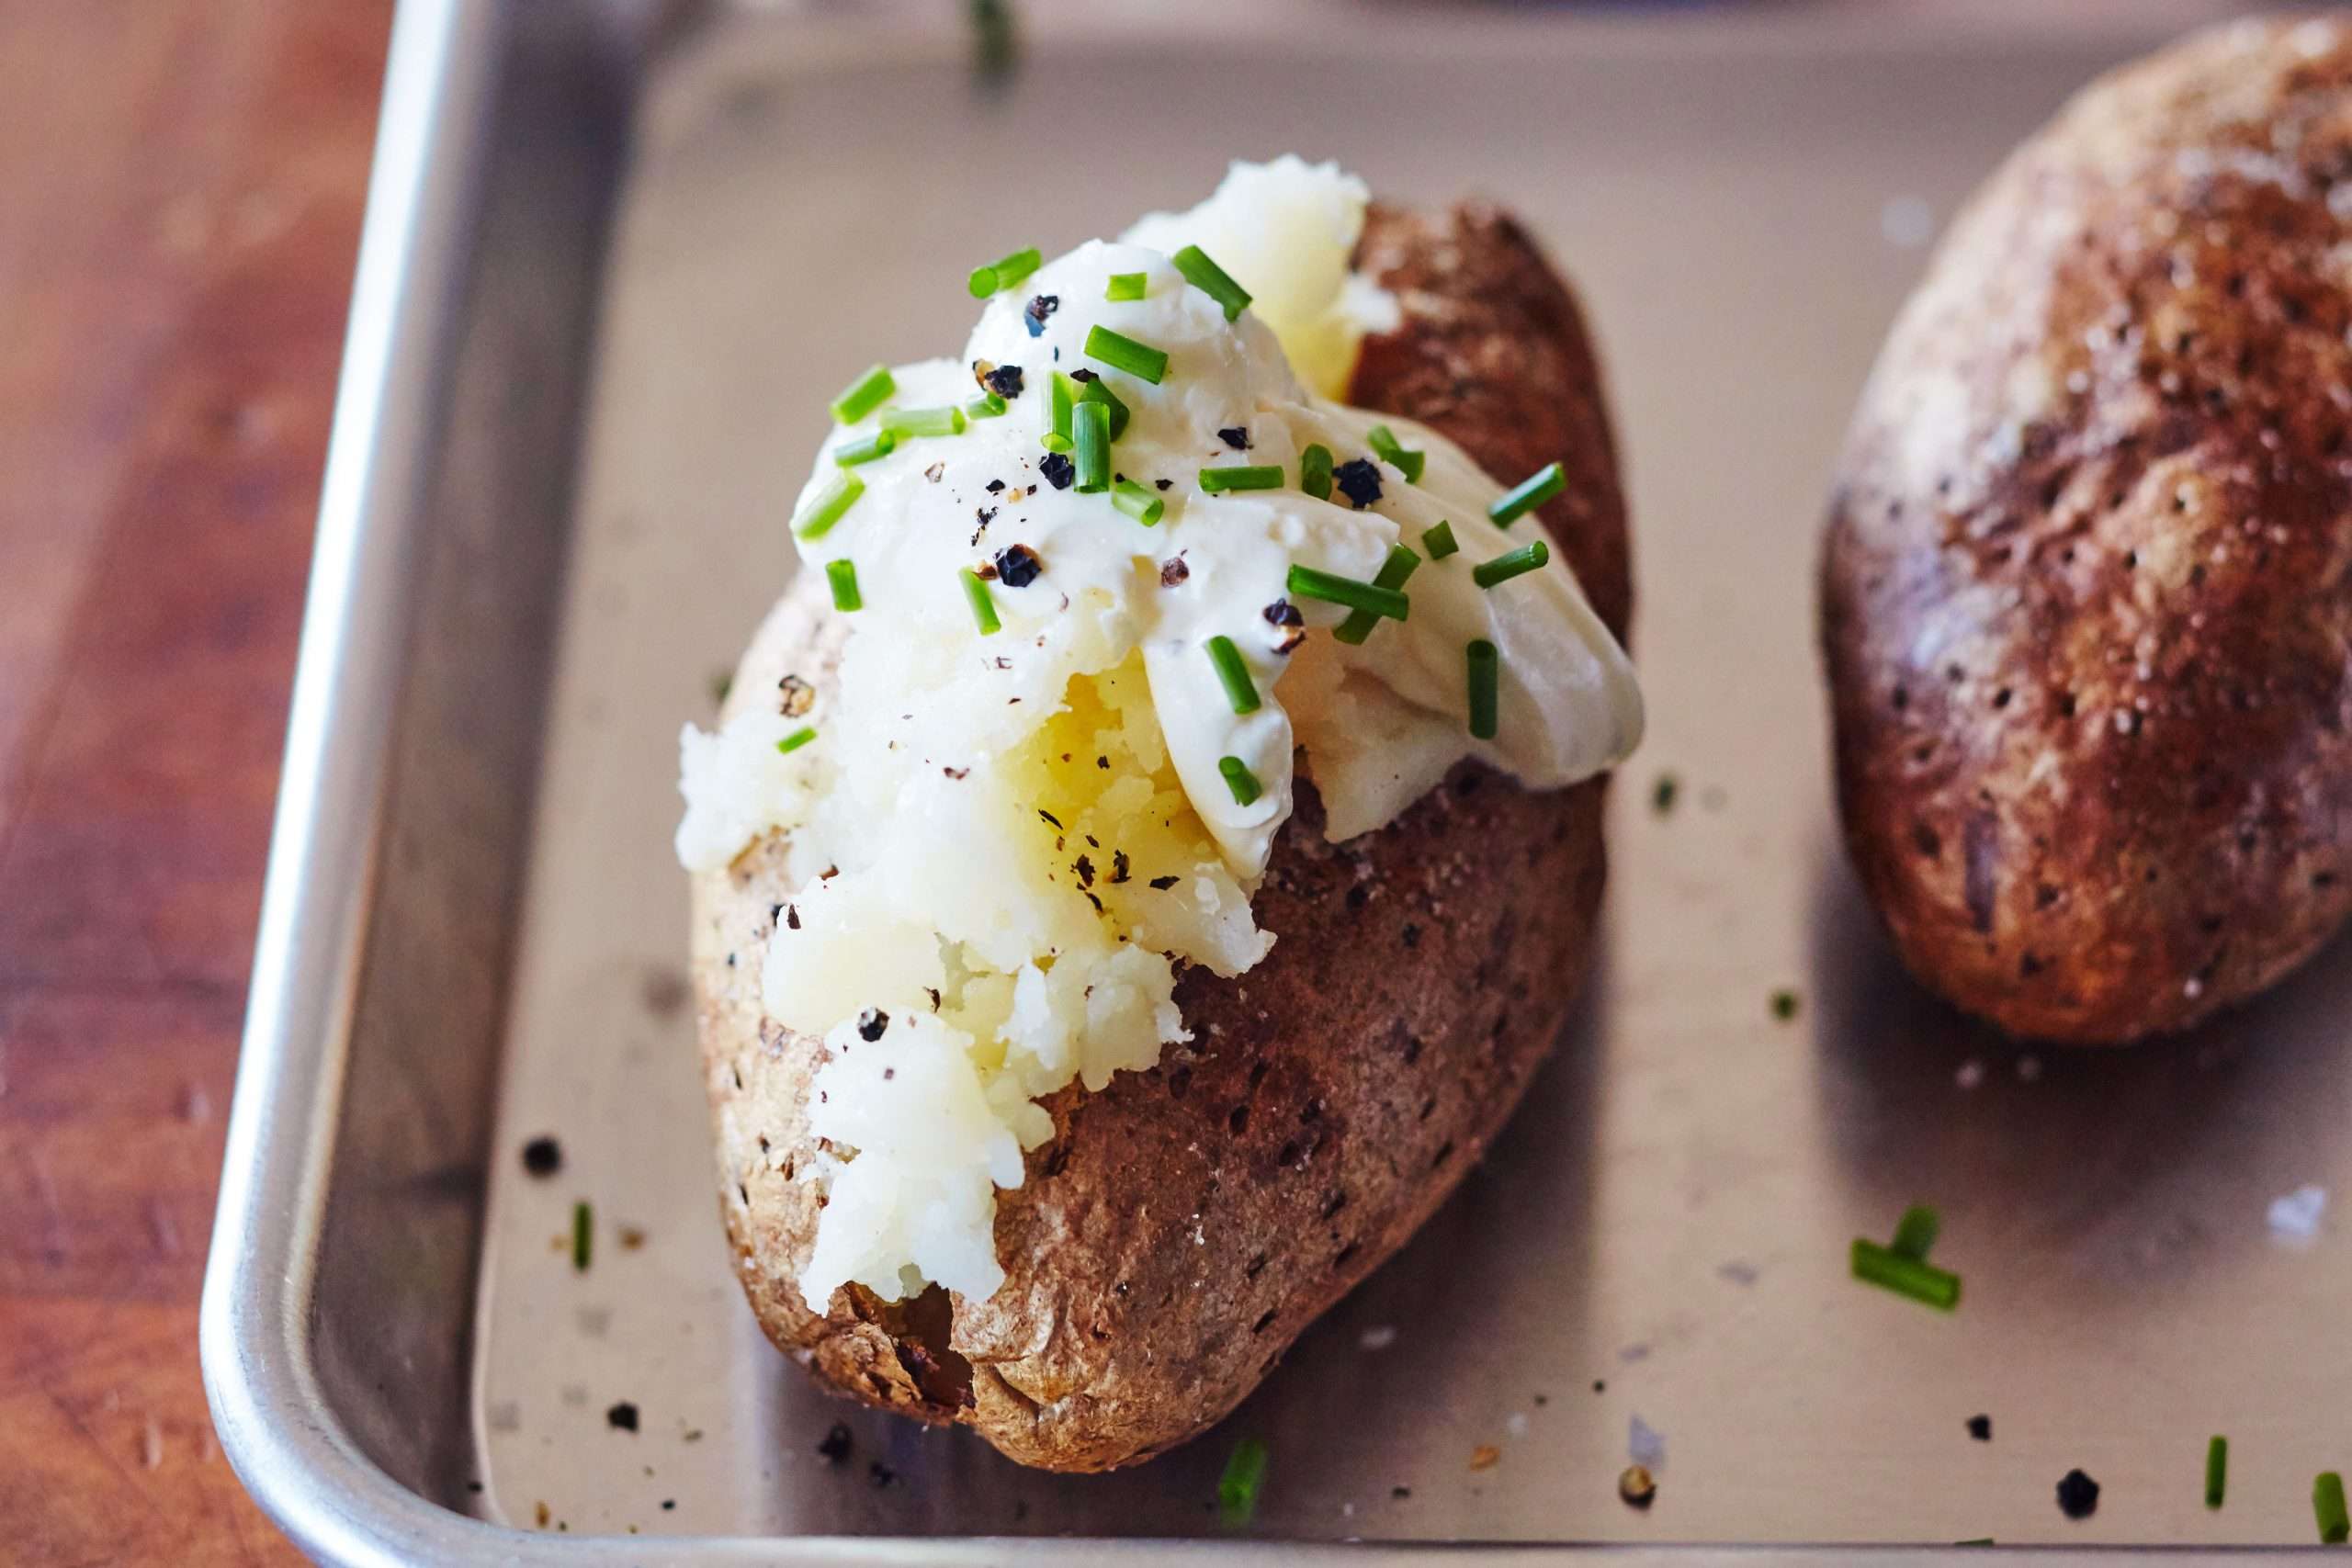 Old Habits: Baked Potatoes Wrapped in Foil or Not?